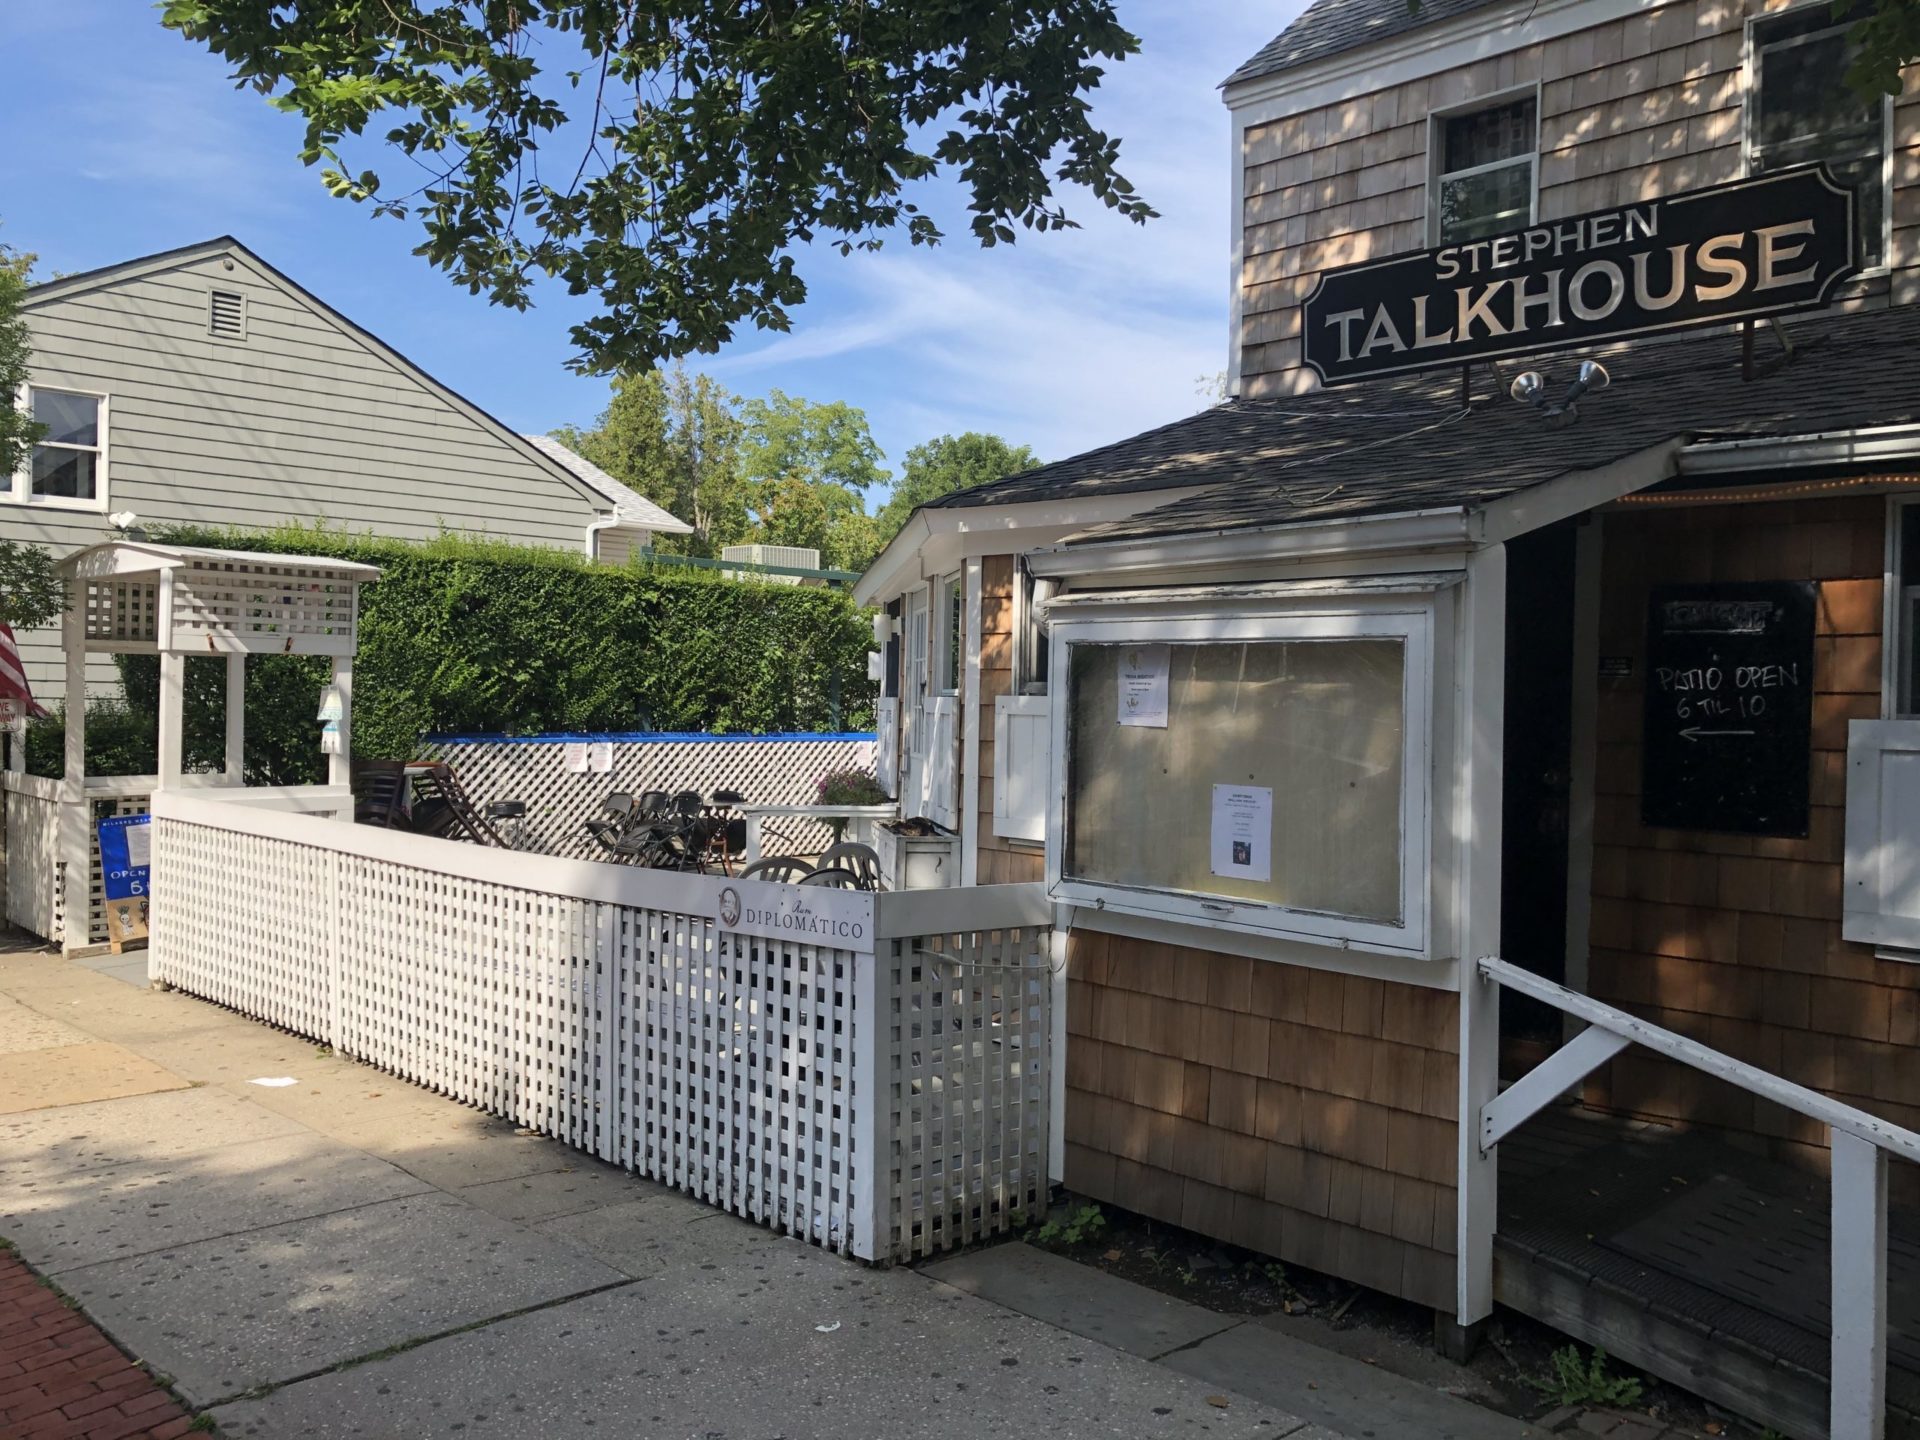 The Stephen Talkhouse will still be serving food and drinks, but it cannot advertise live music.